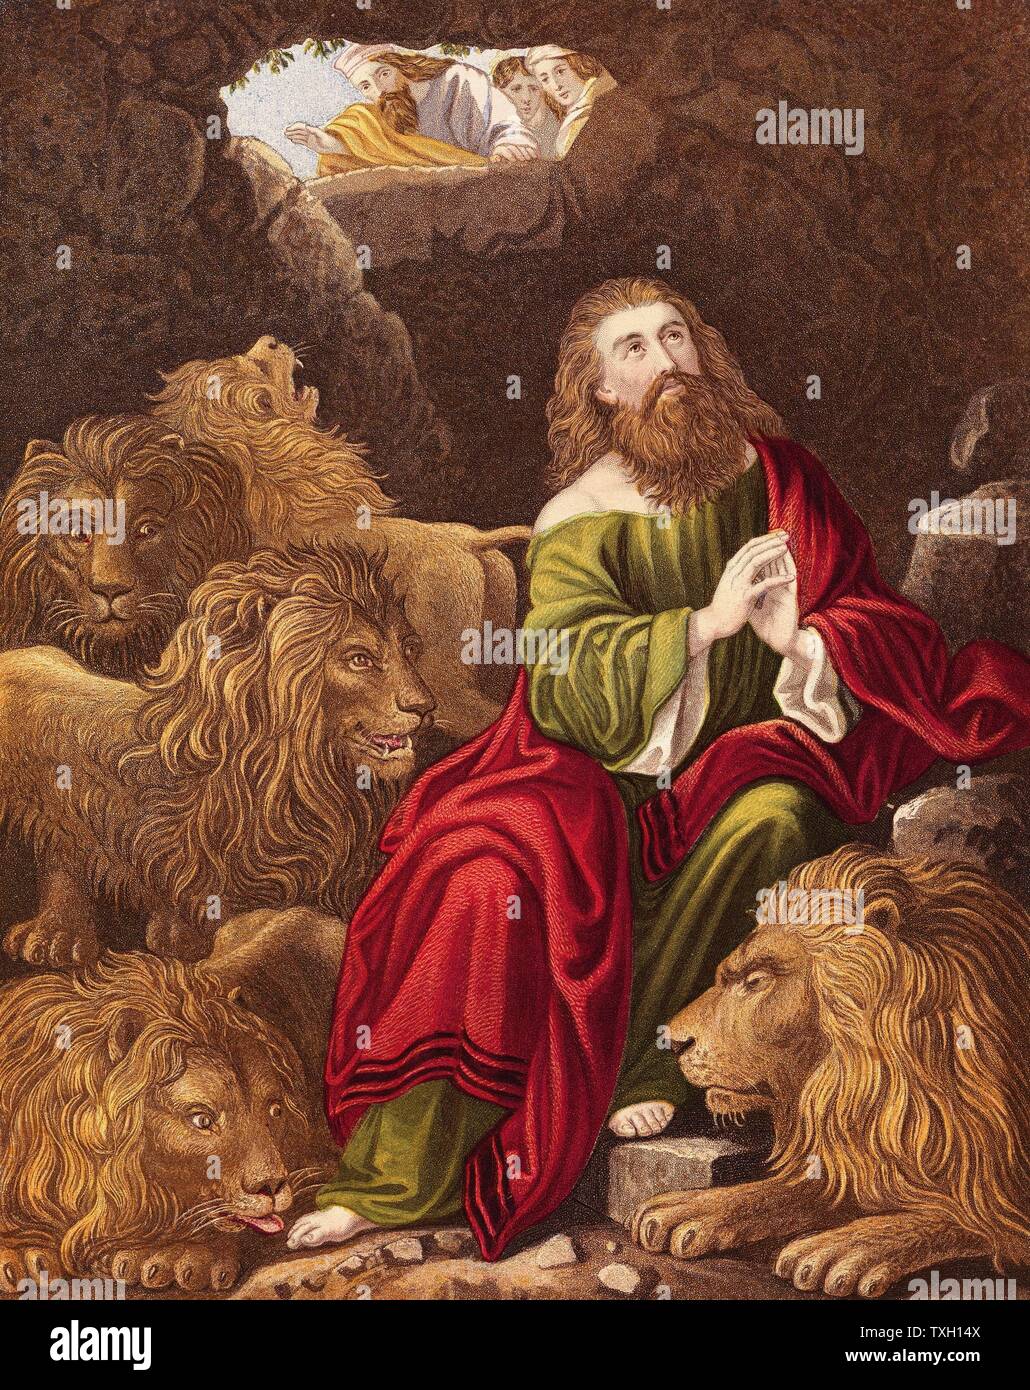 Daniel, one of four great Hebrew prophets, cast into the Lions' den by Nebuchadnezzar (Nebuchadrezzar) king of Babylon who is calling down '..is thy God …able to delivery thee from the lions?'  'Bible' Daniel 6:20.  Daniel's survival demonstrated power of his true God Jehovah and insignificance of the Assyrio-Babylonian god Bel (Baal).  Chromolithograph c1860 Stock Photo